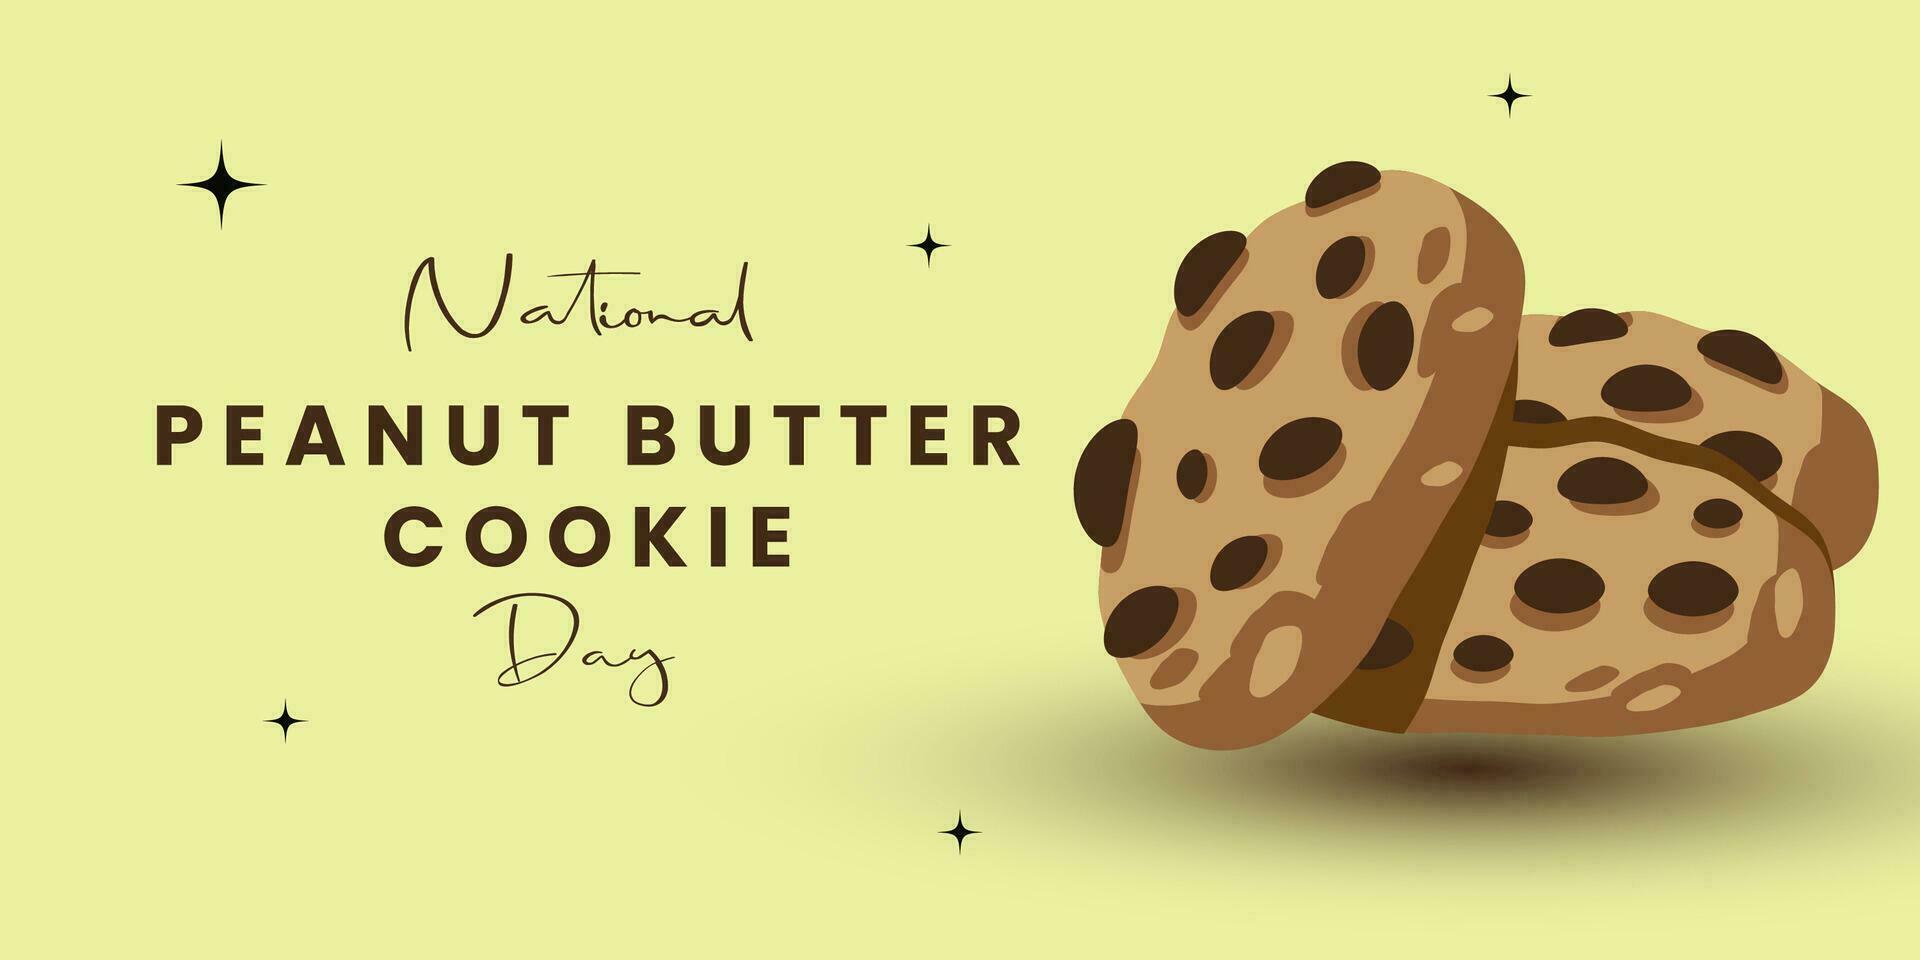 National Peanut Butter Cookie Day on June 12. Sweet cookies with peanuts vector illustration. Important day.